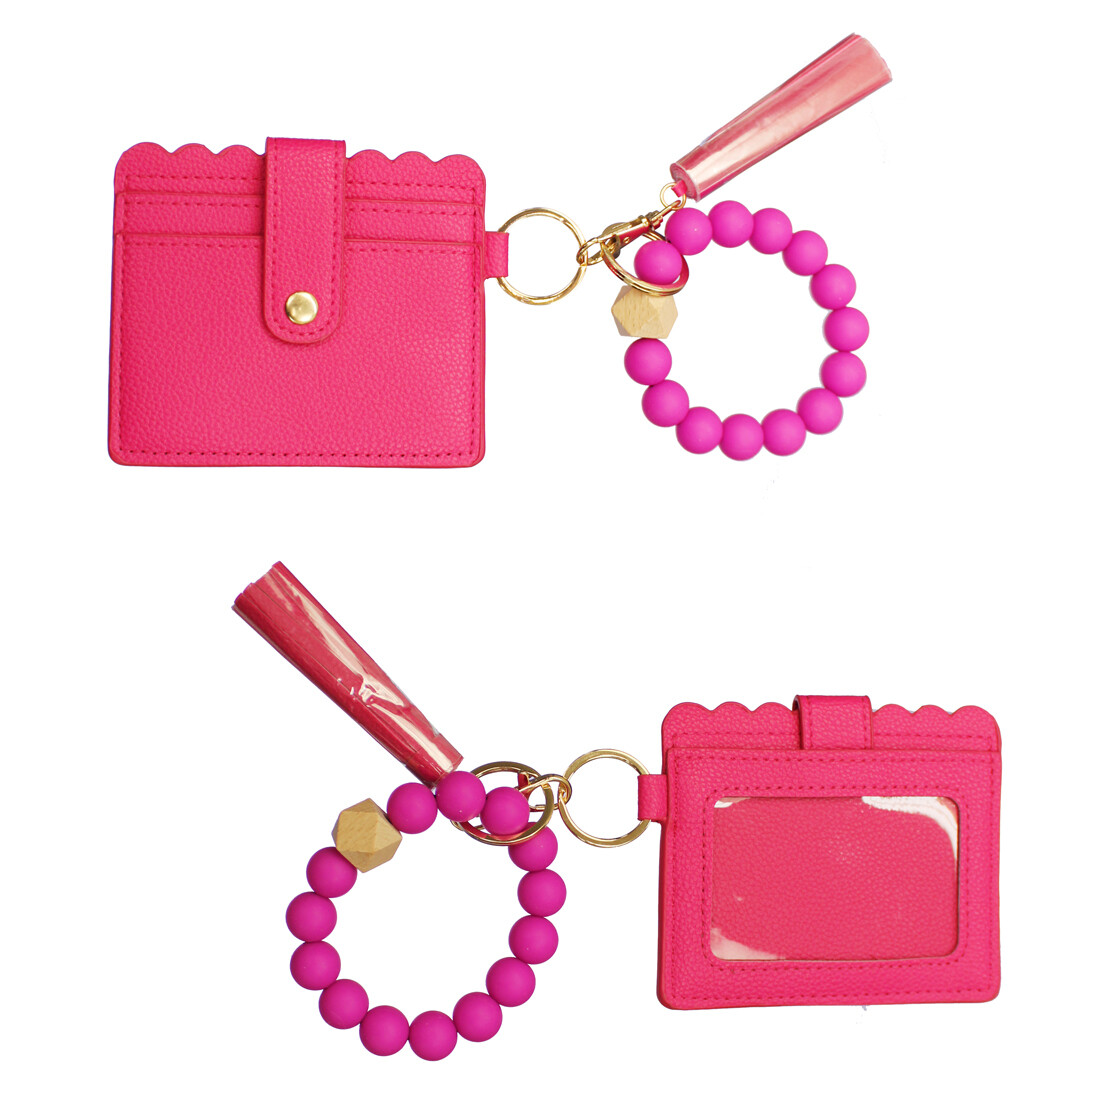 Hot Pink Wristlet with Ball Bangle Keychain